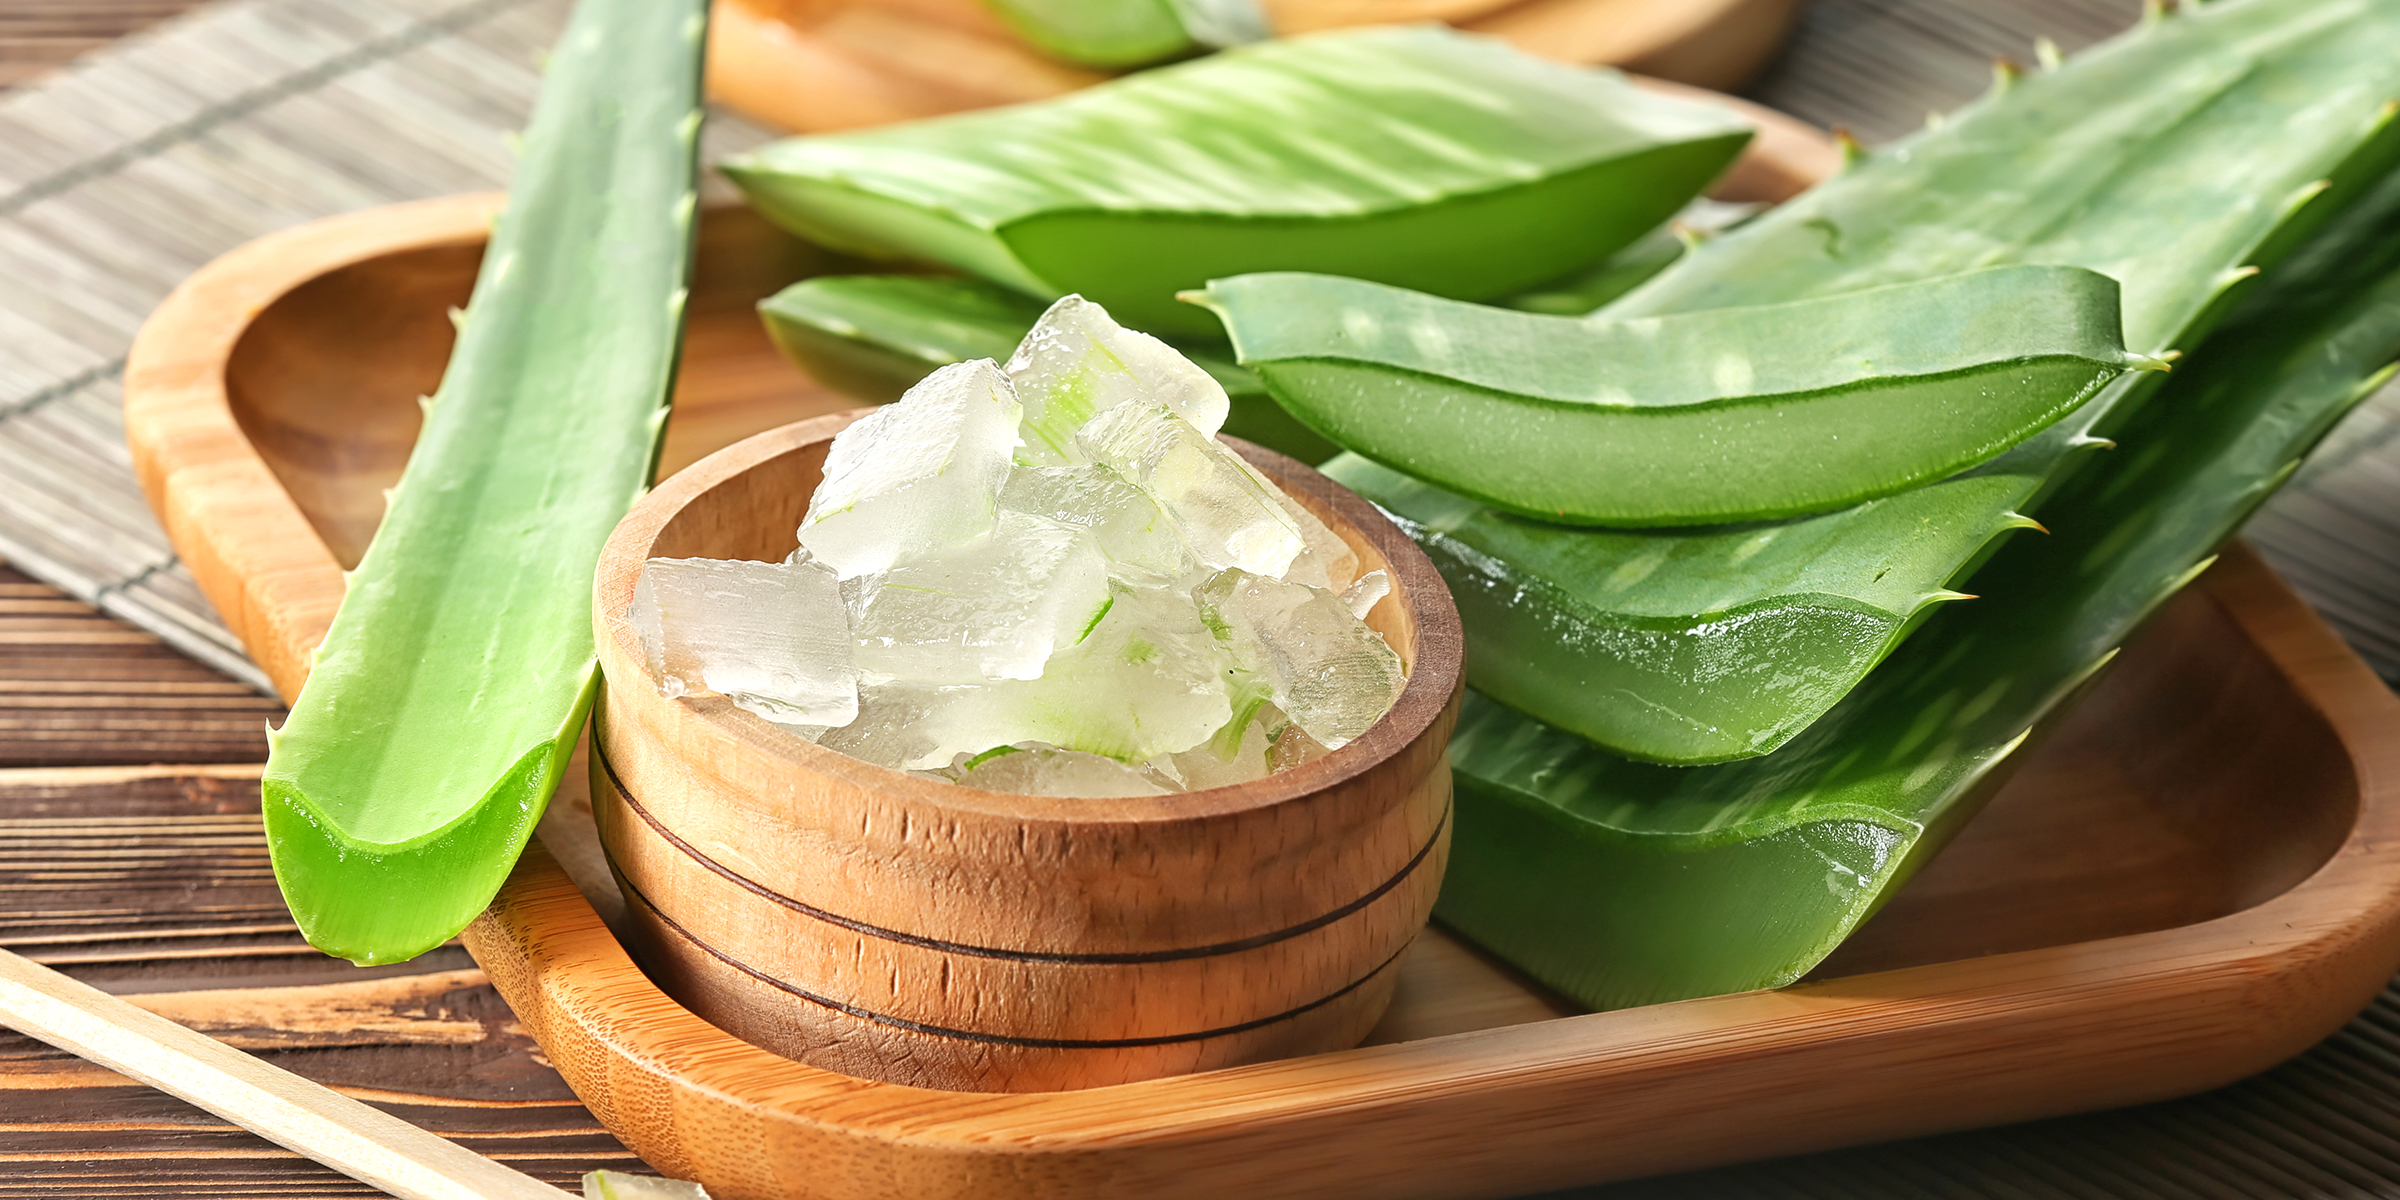 A picture of an aloe vera plant and its gel extracts. | Source: Shutterstock